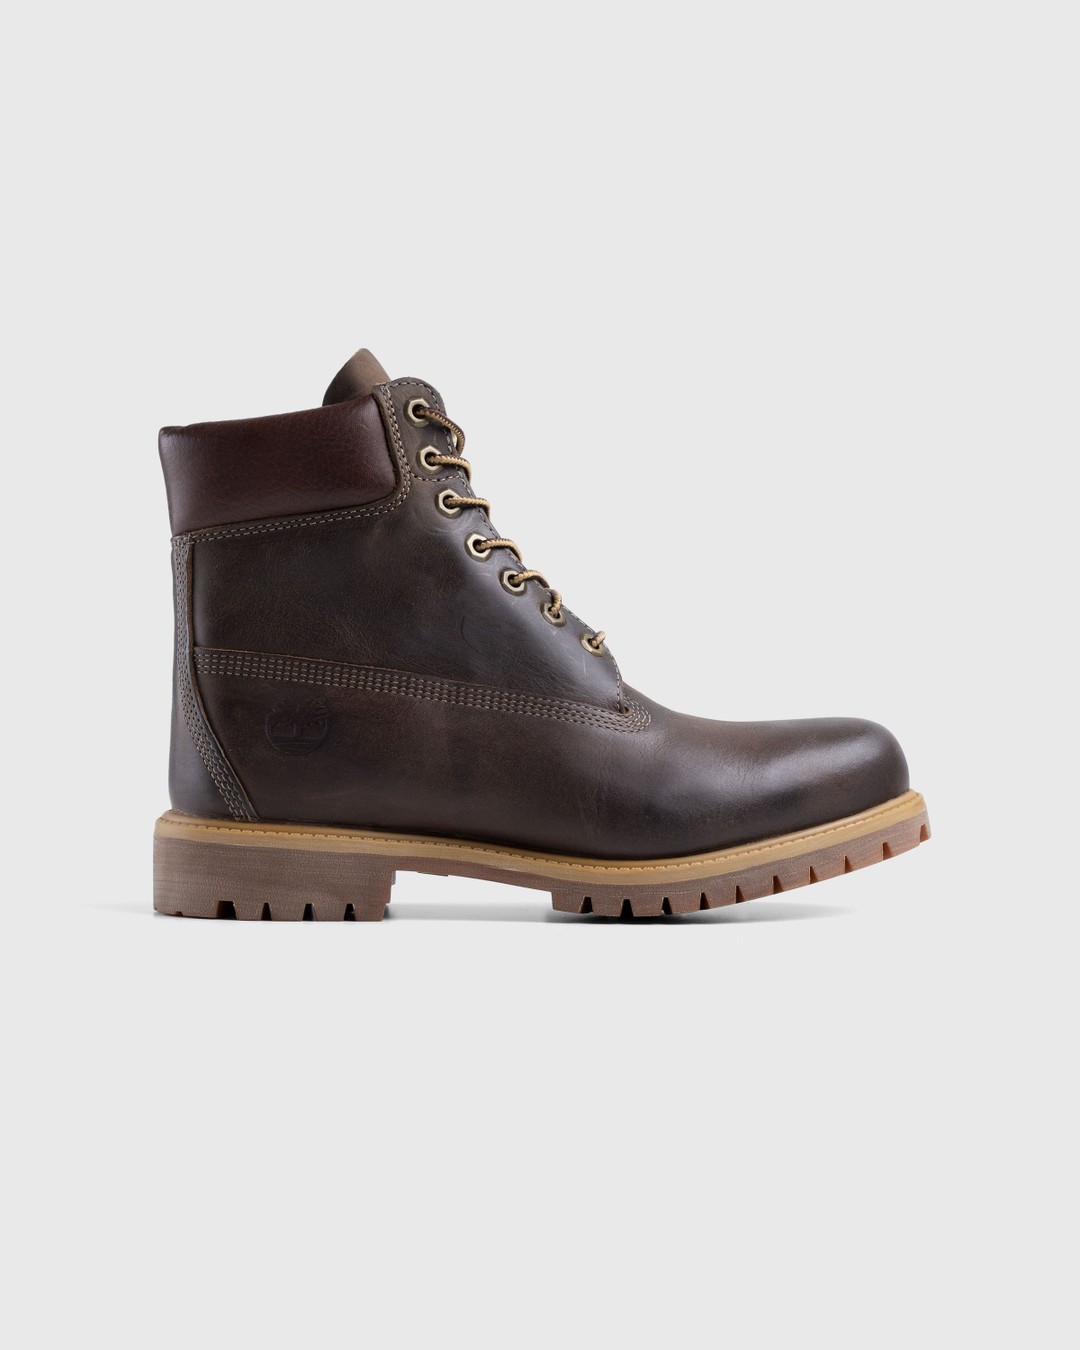 Timberland – Heritage 6 in Premium Brown - Laced Up Boots - Brown - Image 1